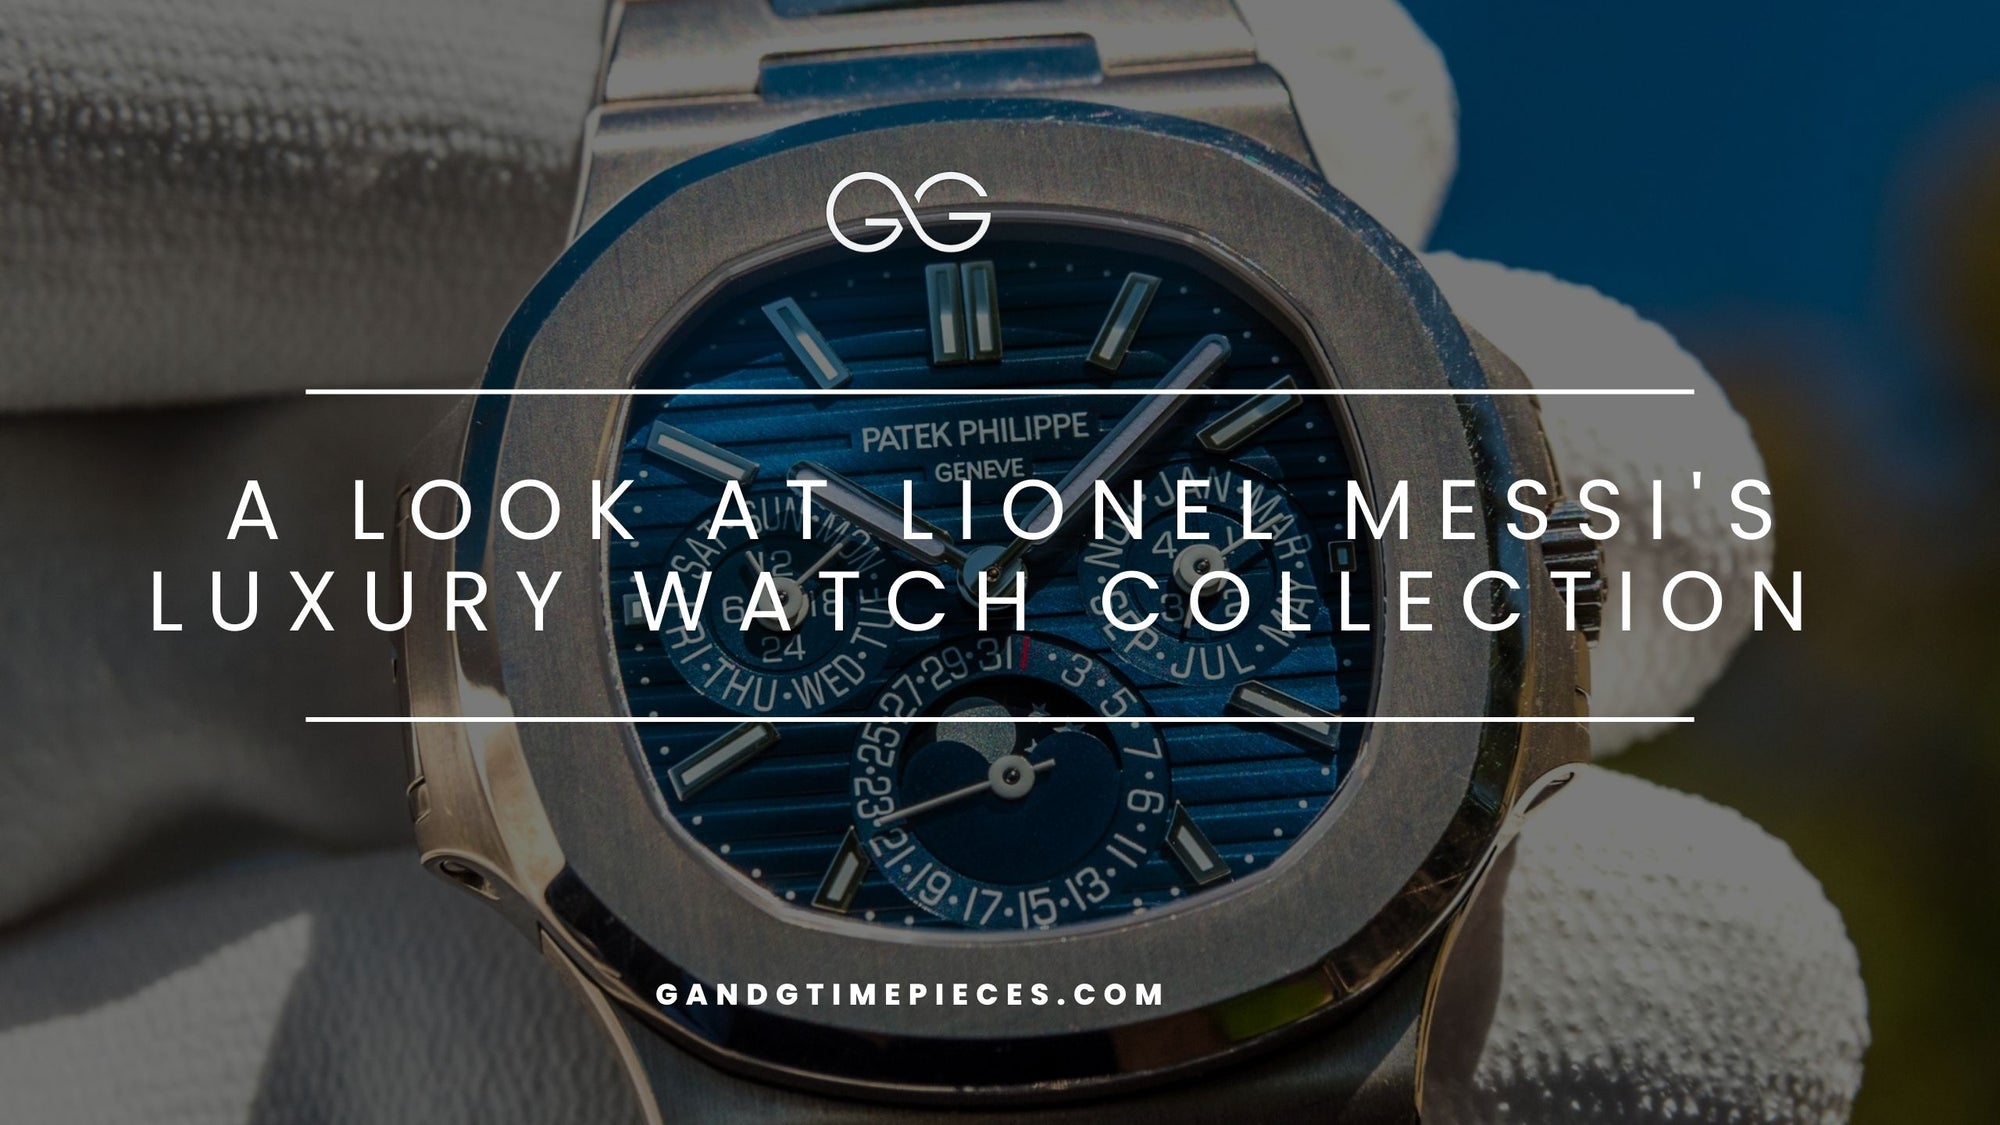 A Look at Lionel Messi's Luxury Watch Collection